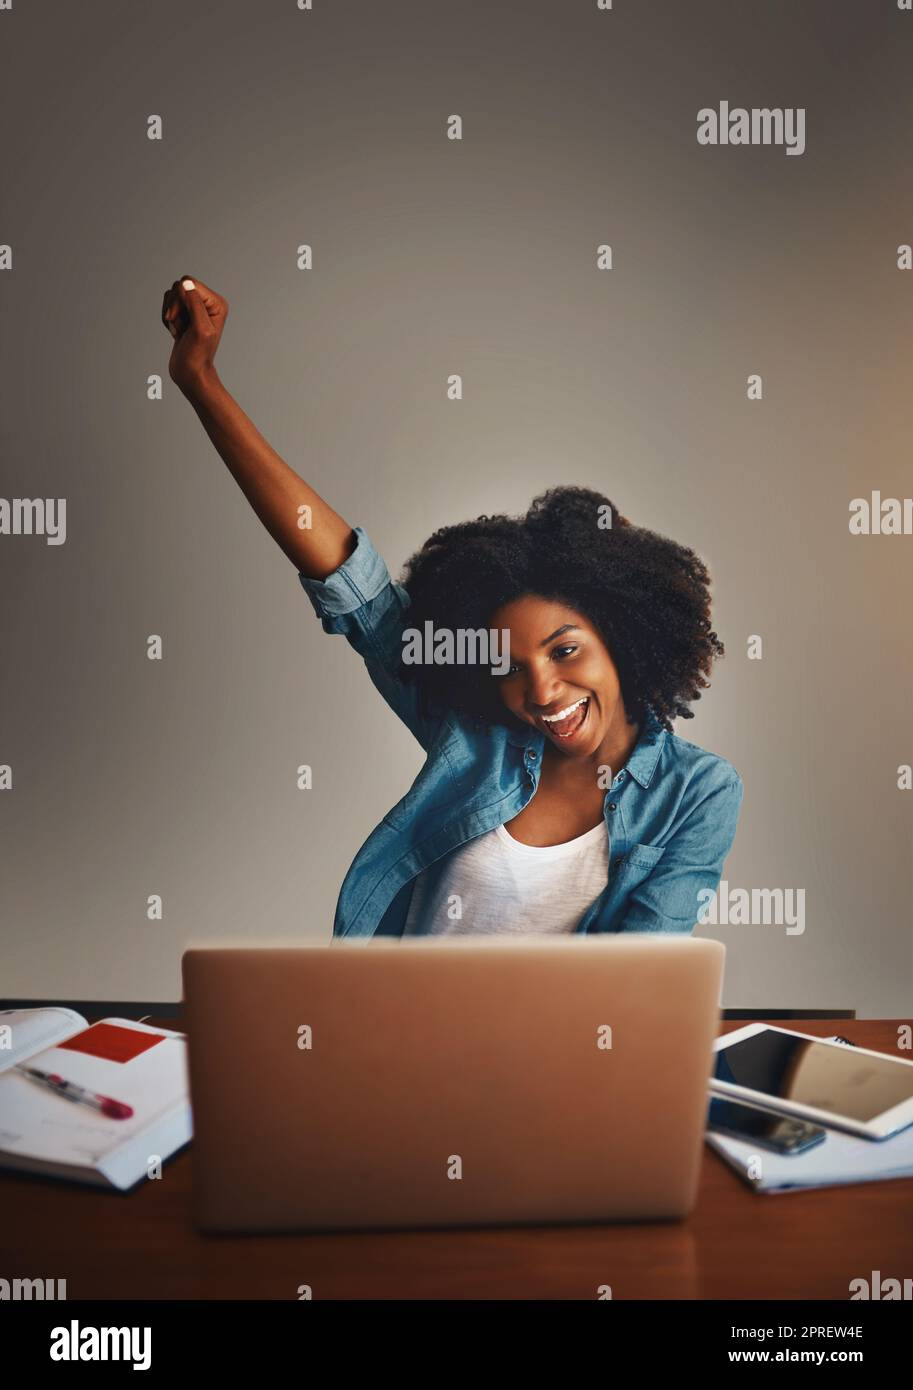 I did it again. Studio shot of an attractive young woman cheering while working on a laptop against a dark background. Stock Photo